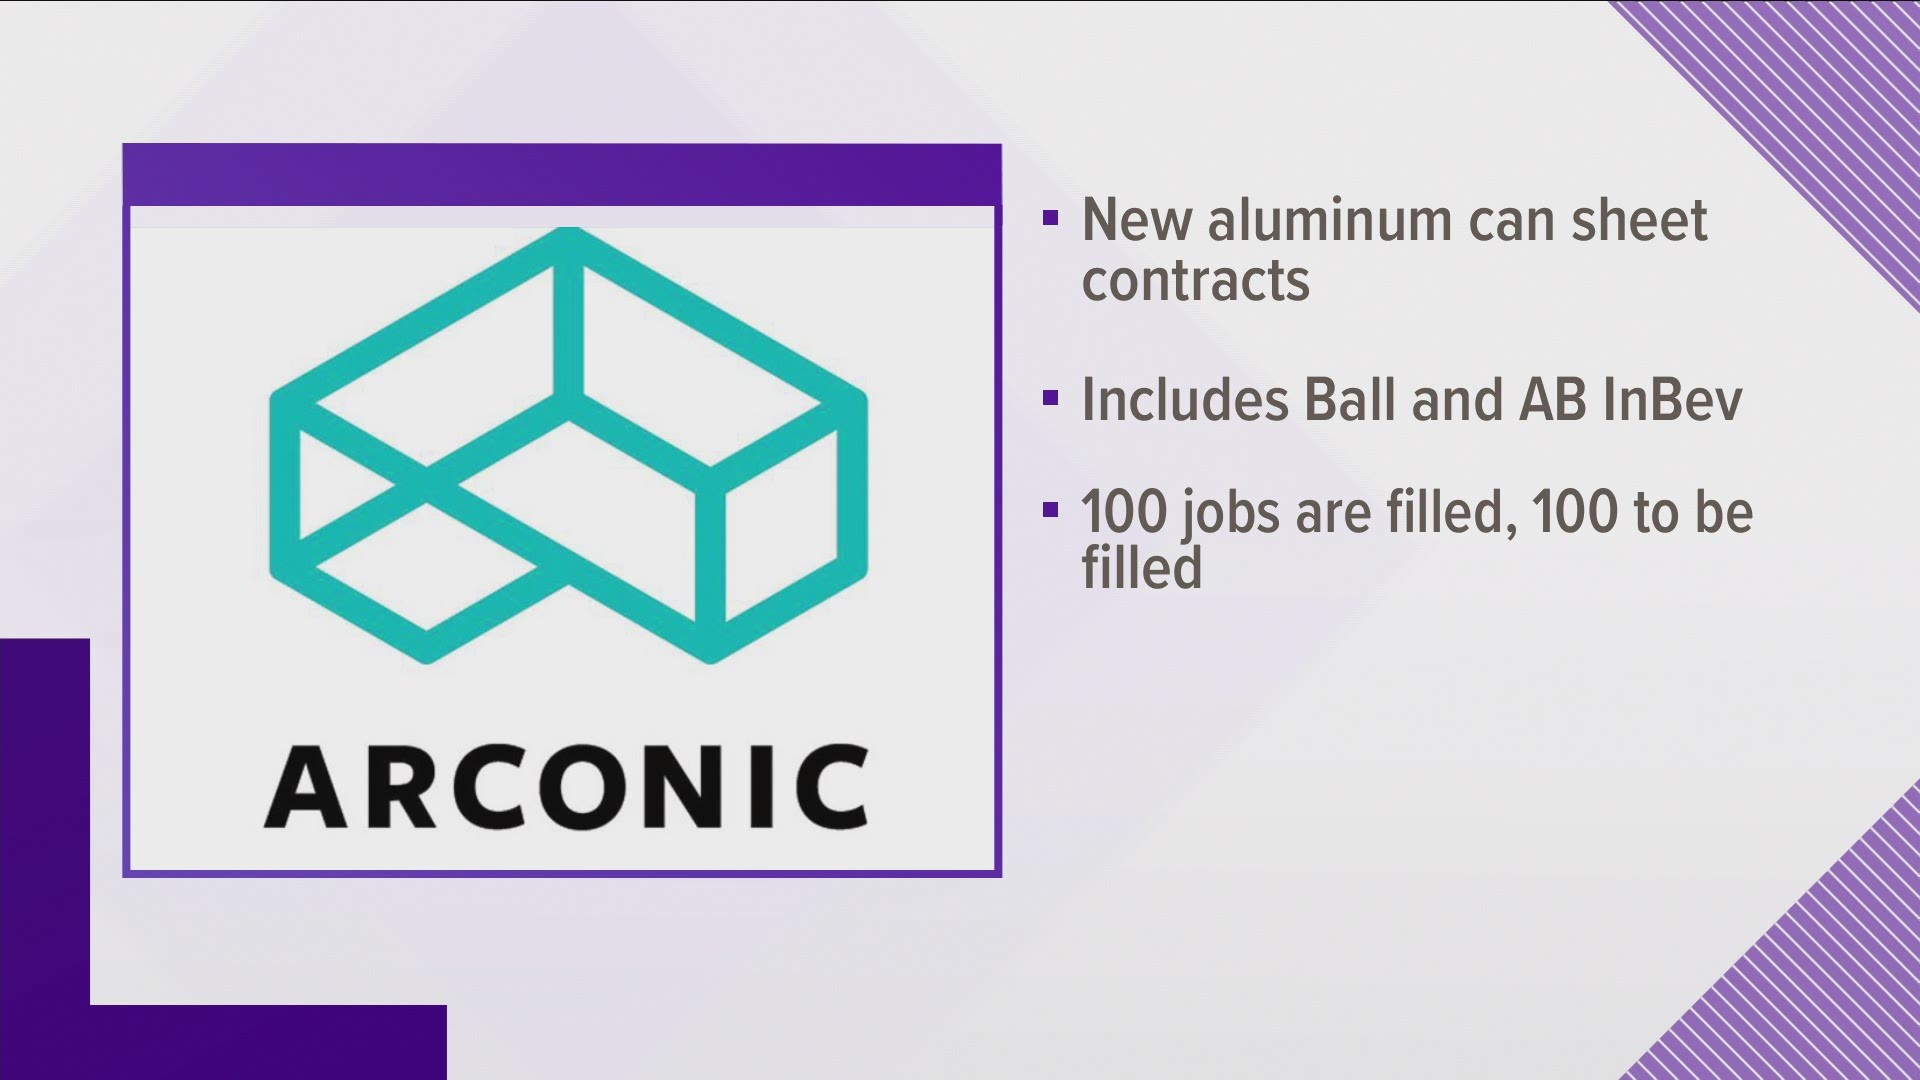 Arconic, a manufacturer in Alcoa, announced 200 new jobs were being added to the area after they signed contracts to produce more cans for drinks.